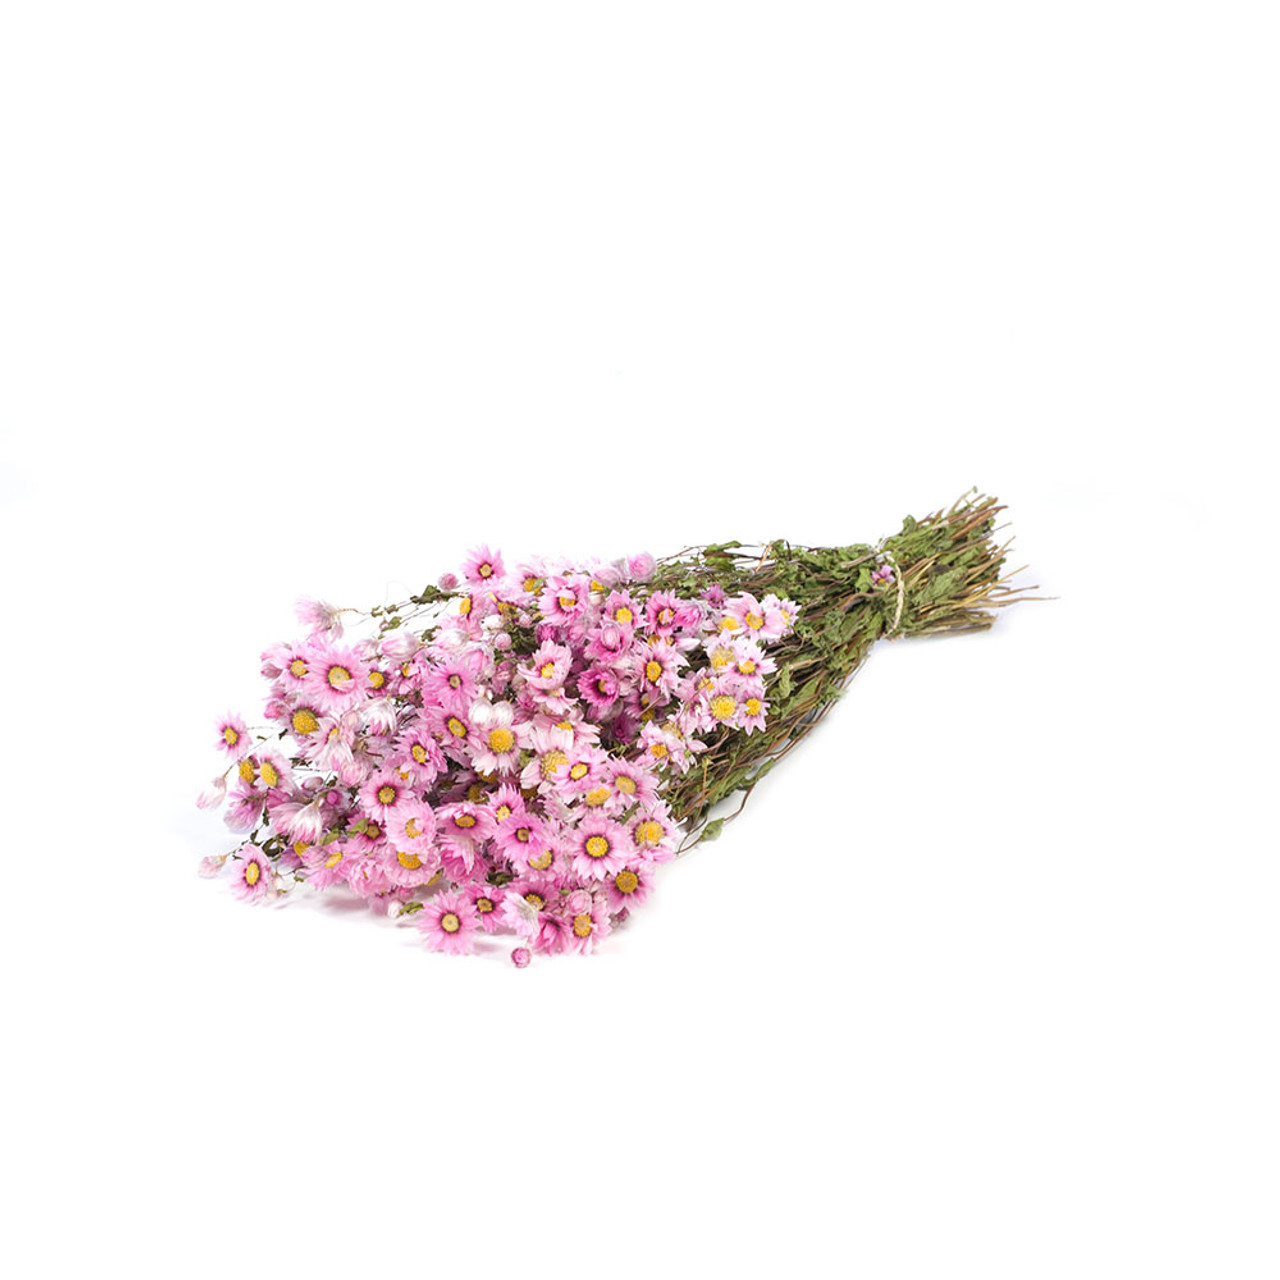 Dried Daisies Bunch / DRIED flowers UK – DRIED Limited